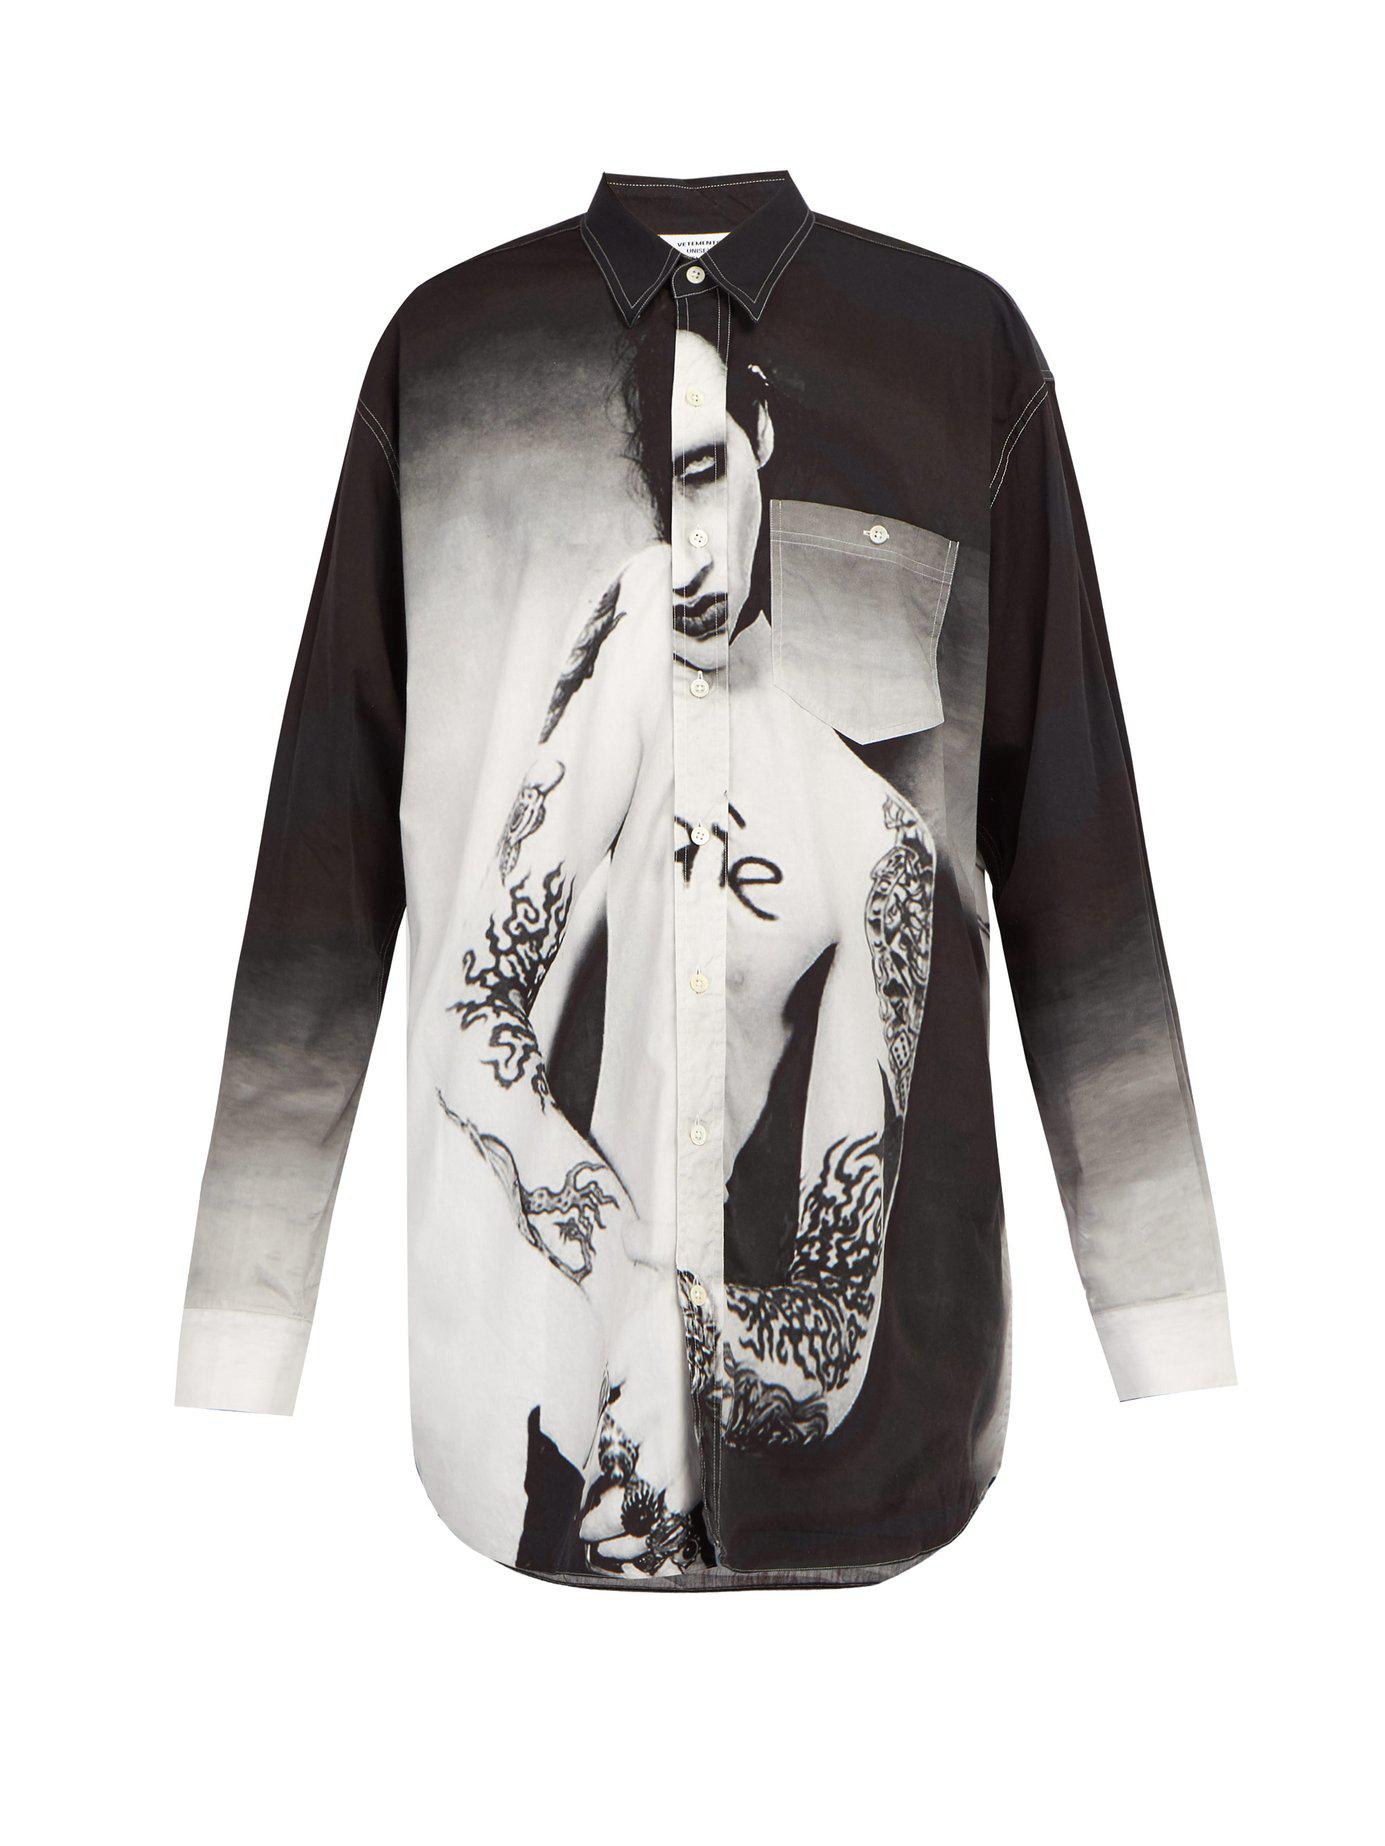 Vetements Marilyn Manson-print Cotton Shirt in Red for Men - Lyst